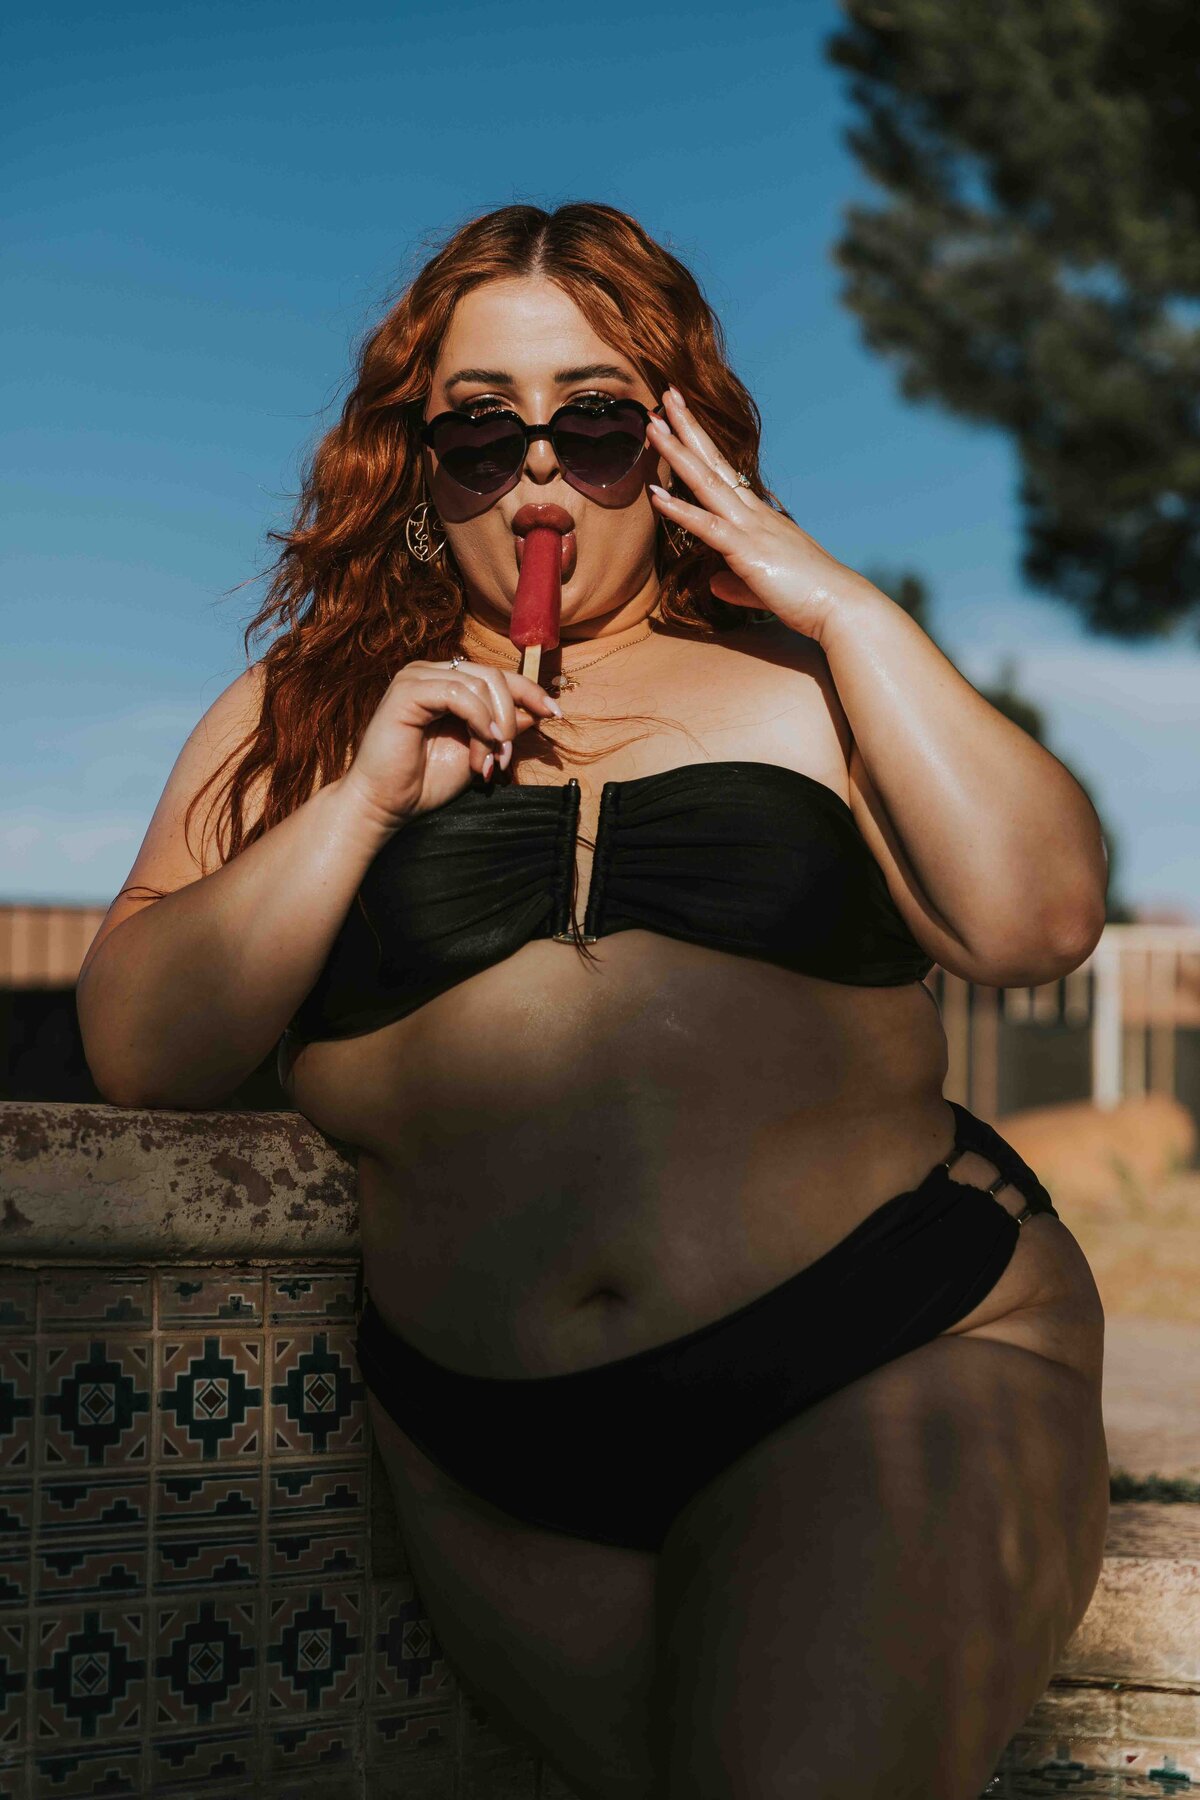 Pool boudoir shoot with popcicles